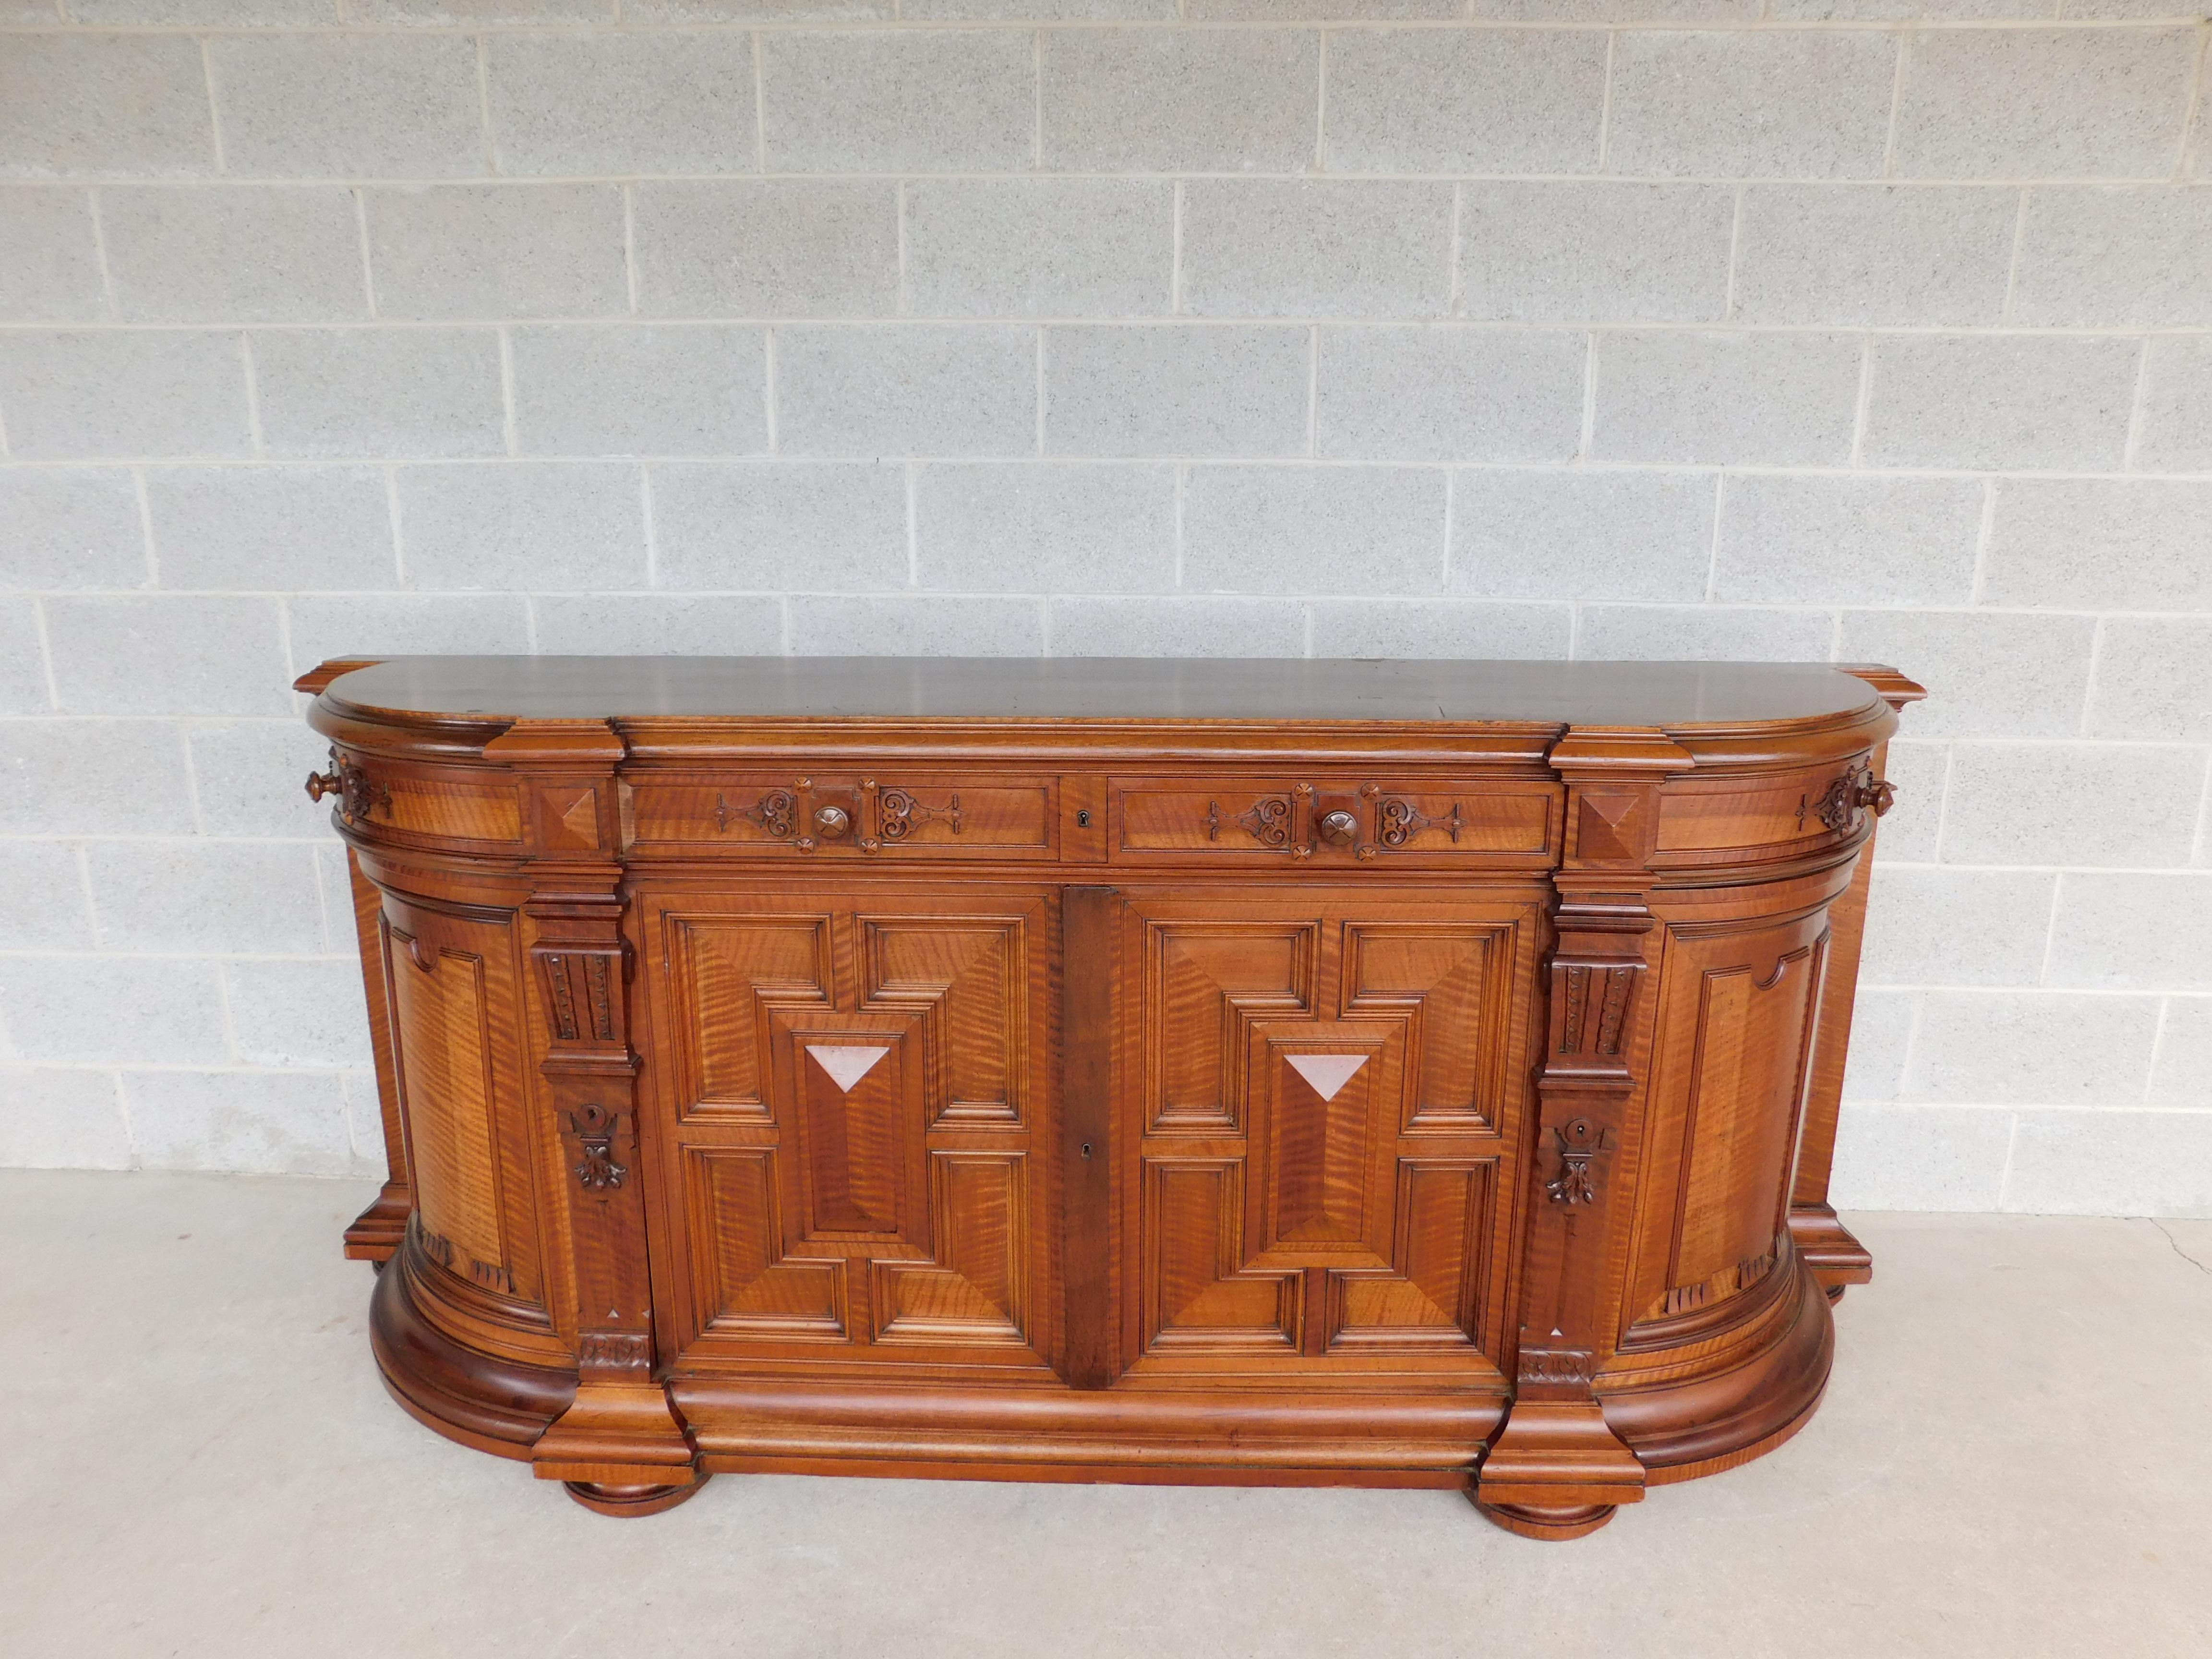 French Renaissance Revival late 19th century, oak with figured-tiger maple, side out quarter pivoting drawers, raised diamond panel geometric applied doors, - approx 125 years old ( no key )
Very good antique condition, original finish, - see all